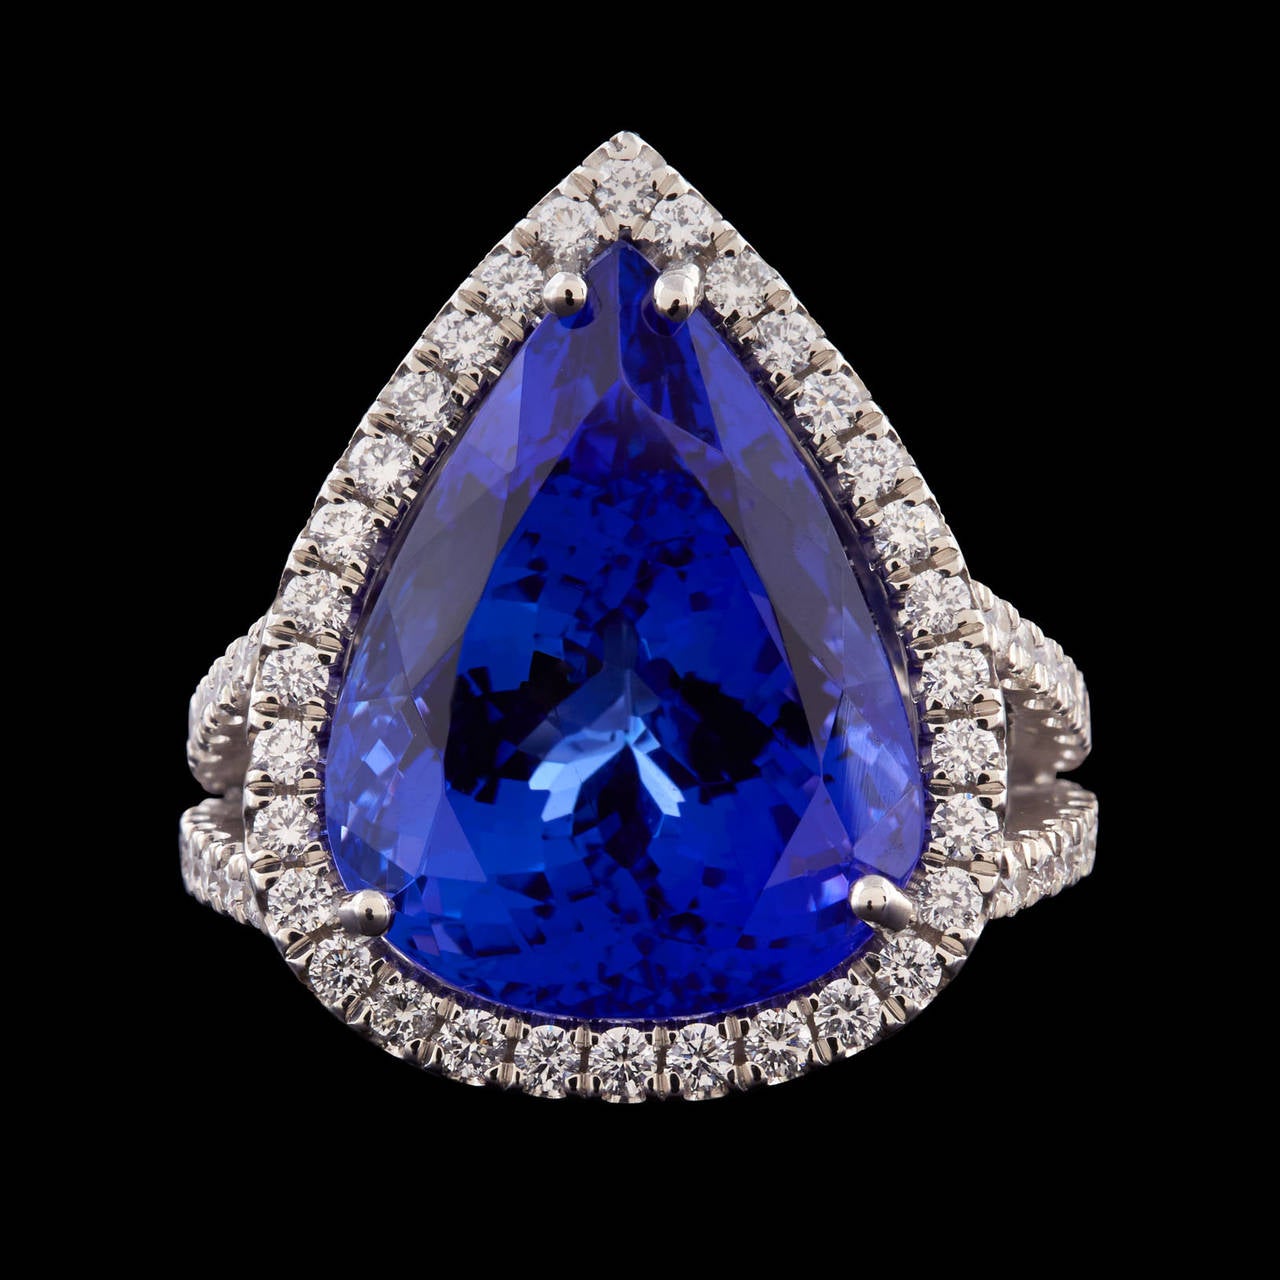 Platinum Cocktail Ring Features a Stunning Natural Vivid Blue 12.67 Carat Pear Shape Tanzanite set in a Halo of Round Brilliant Cut Diamonds. Additional diamonds are accented down the shank and along the gallery. There are 132 round brilliant cut